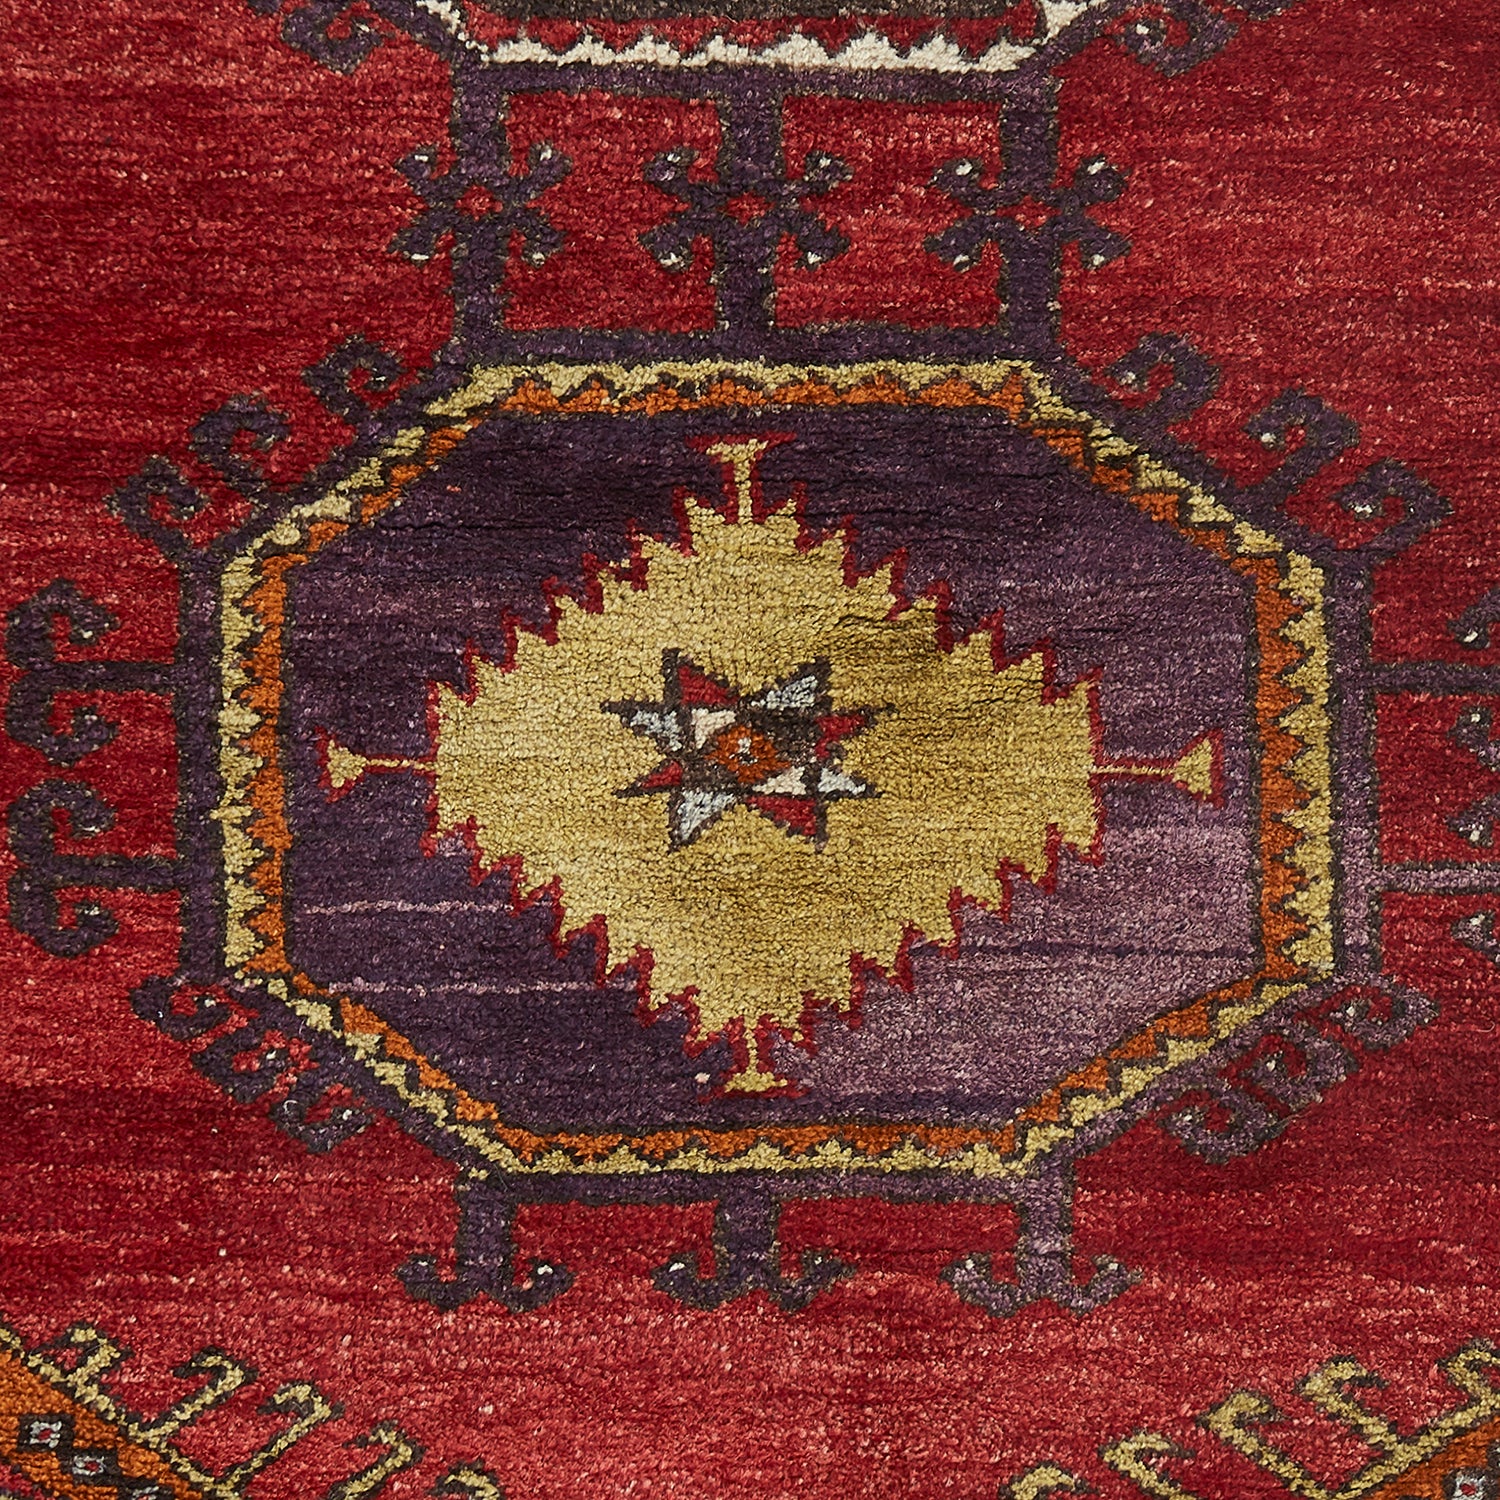 Close-up of a vibrant, intricately patterned traditional hand-woven rug.